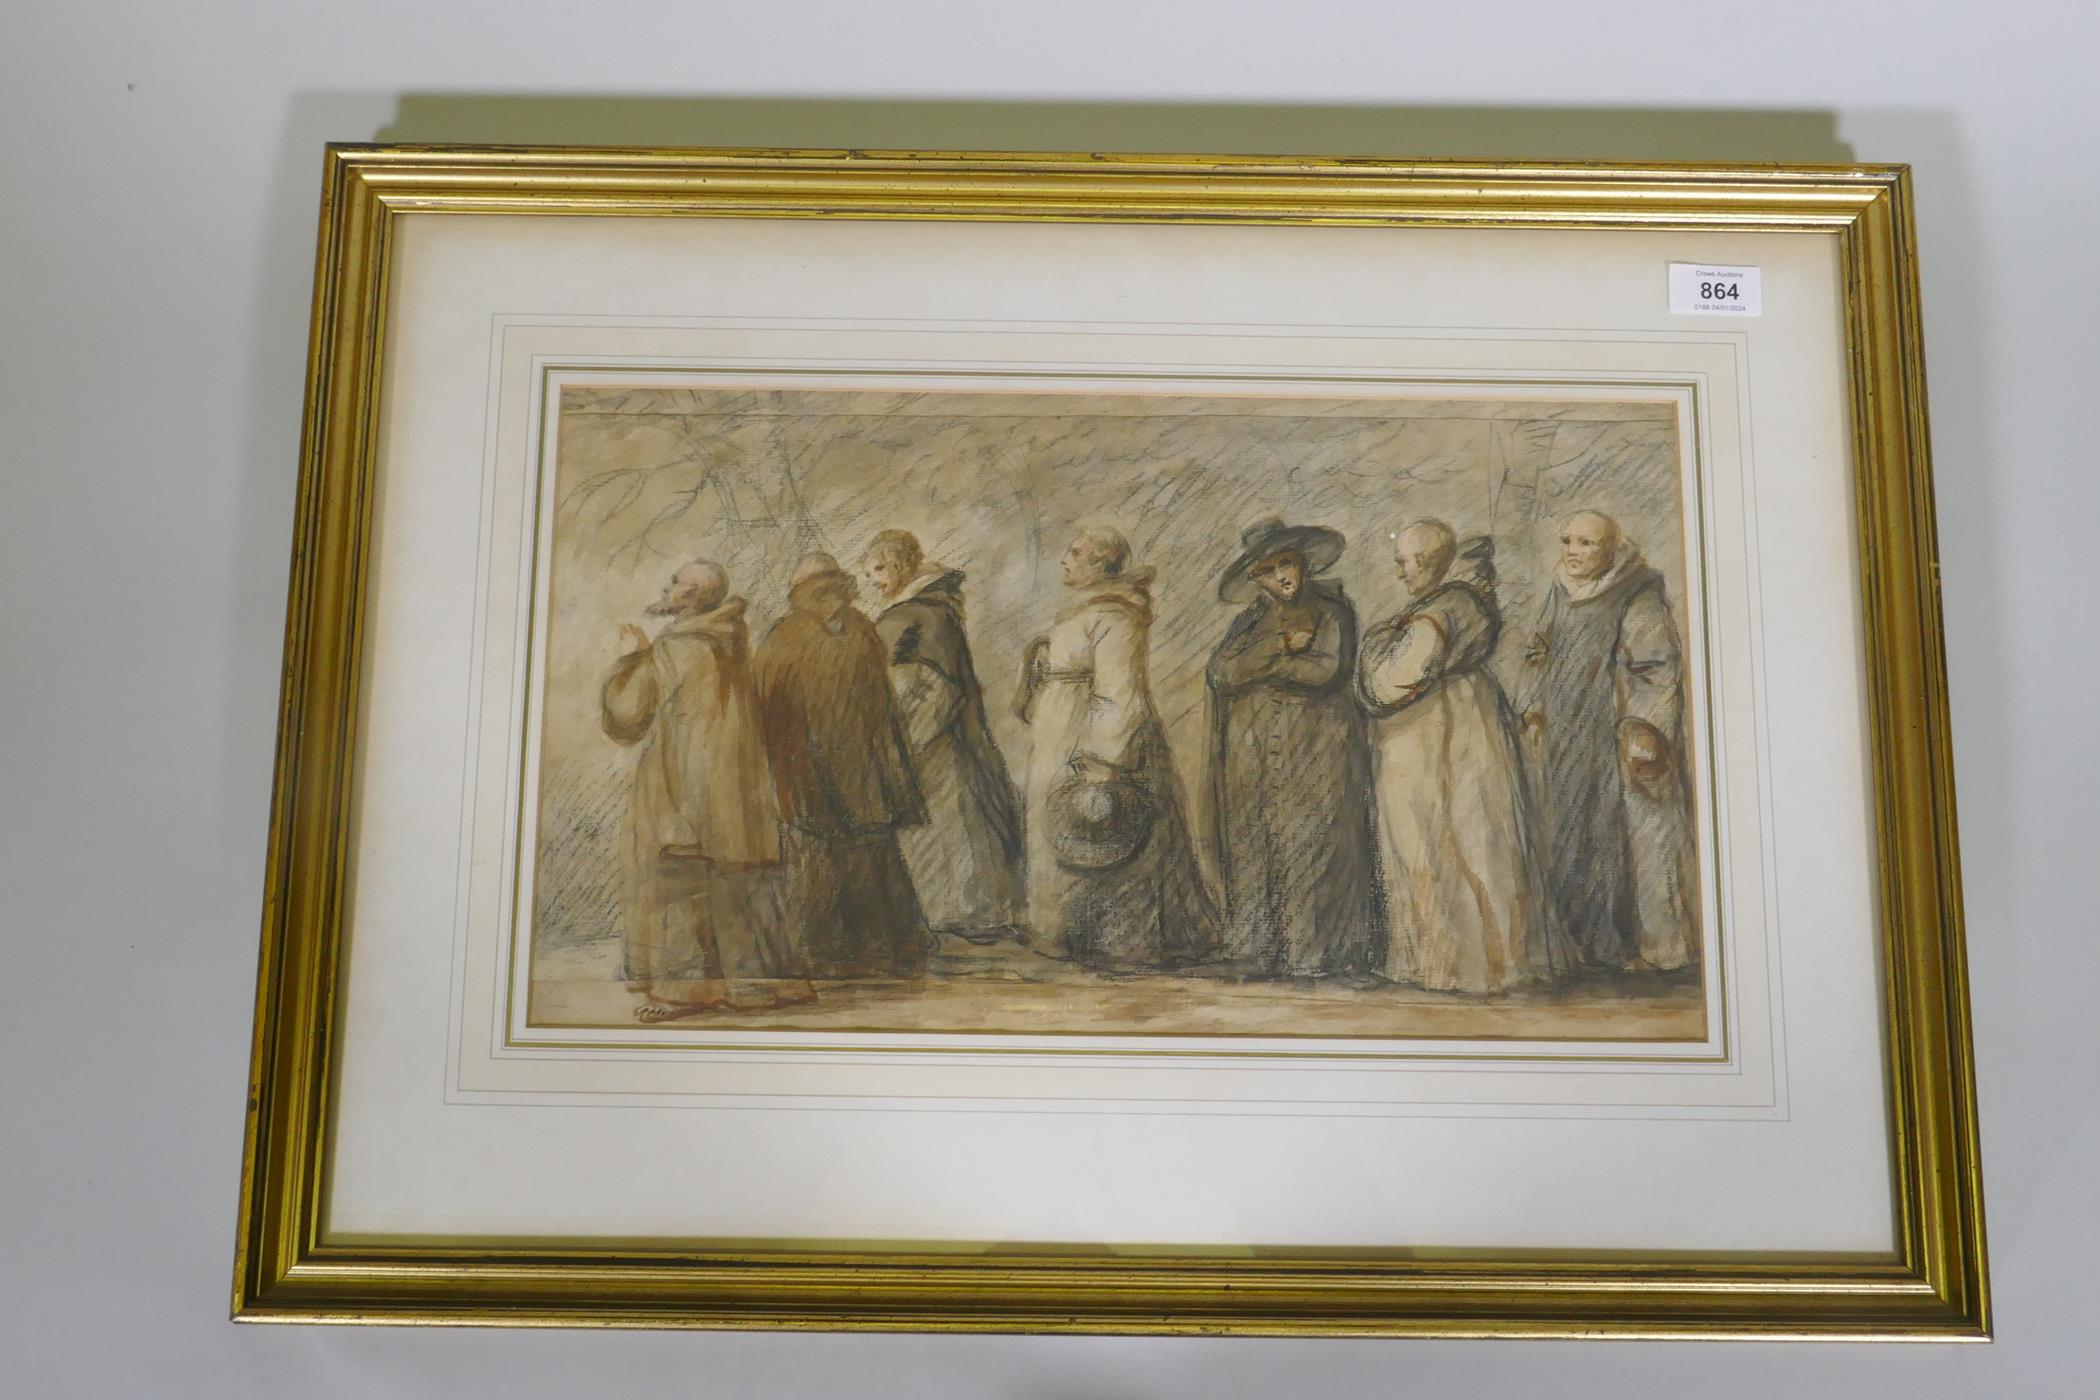 Procession of clergy, pencil and wash on paper, inscribed verso H.W. Bunbury, C19th unsigned, but - Image 2 of 4